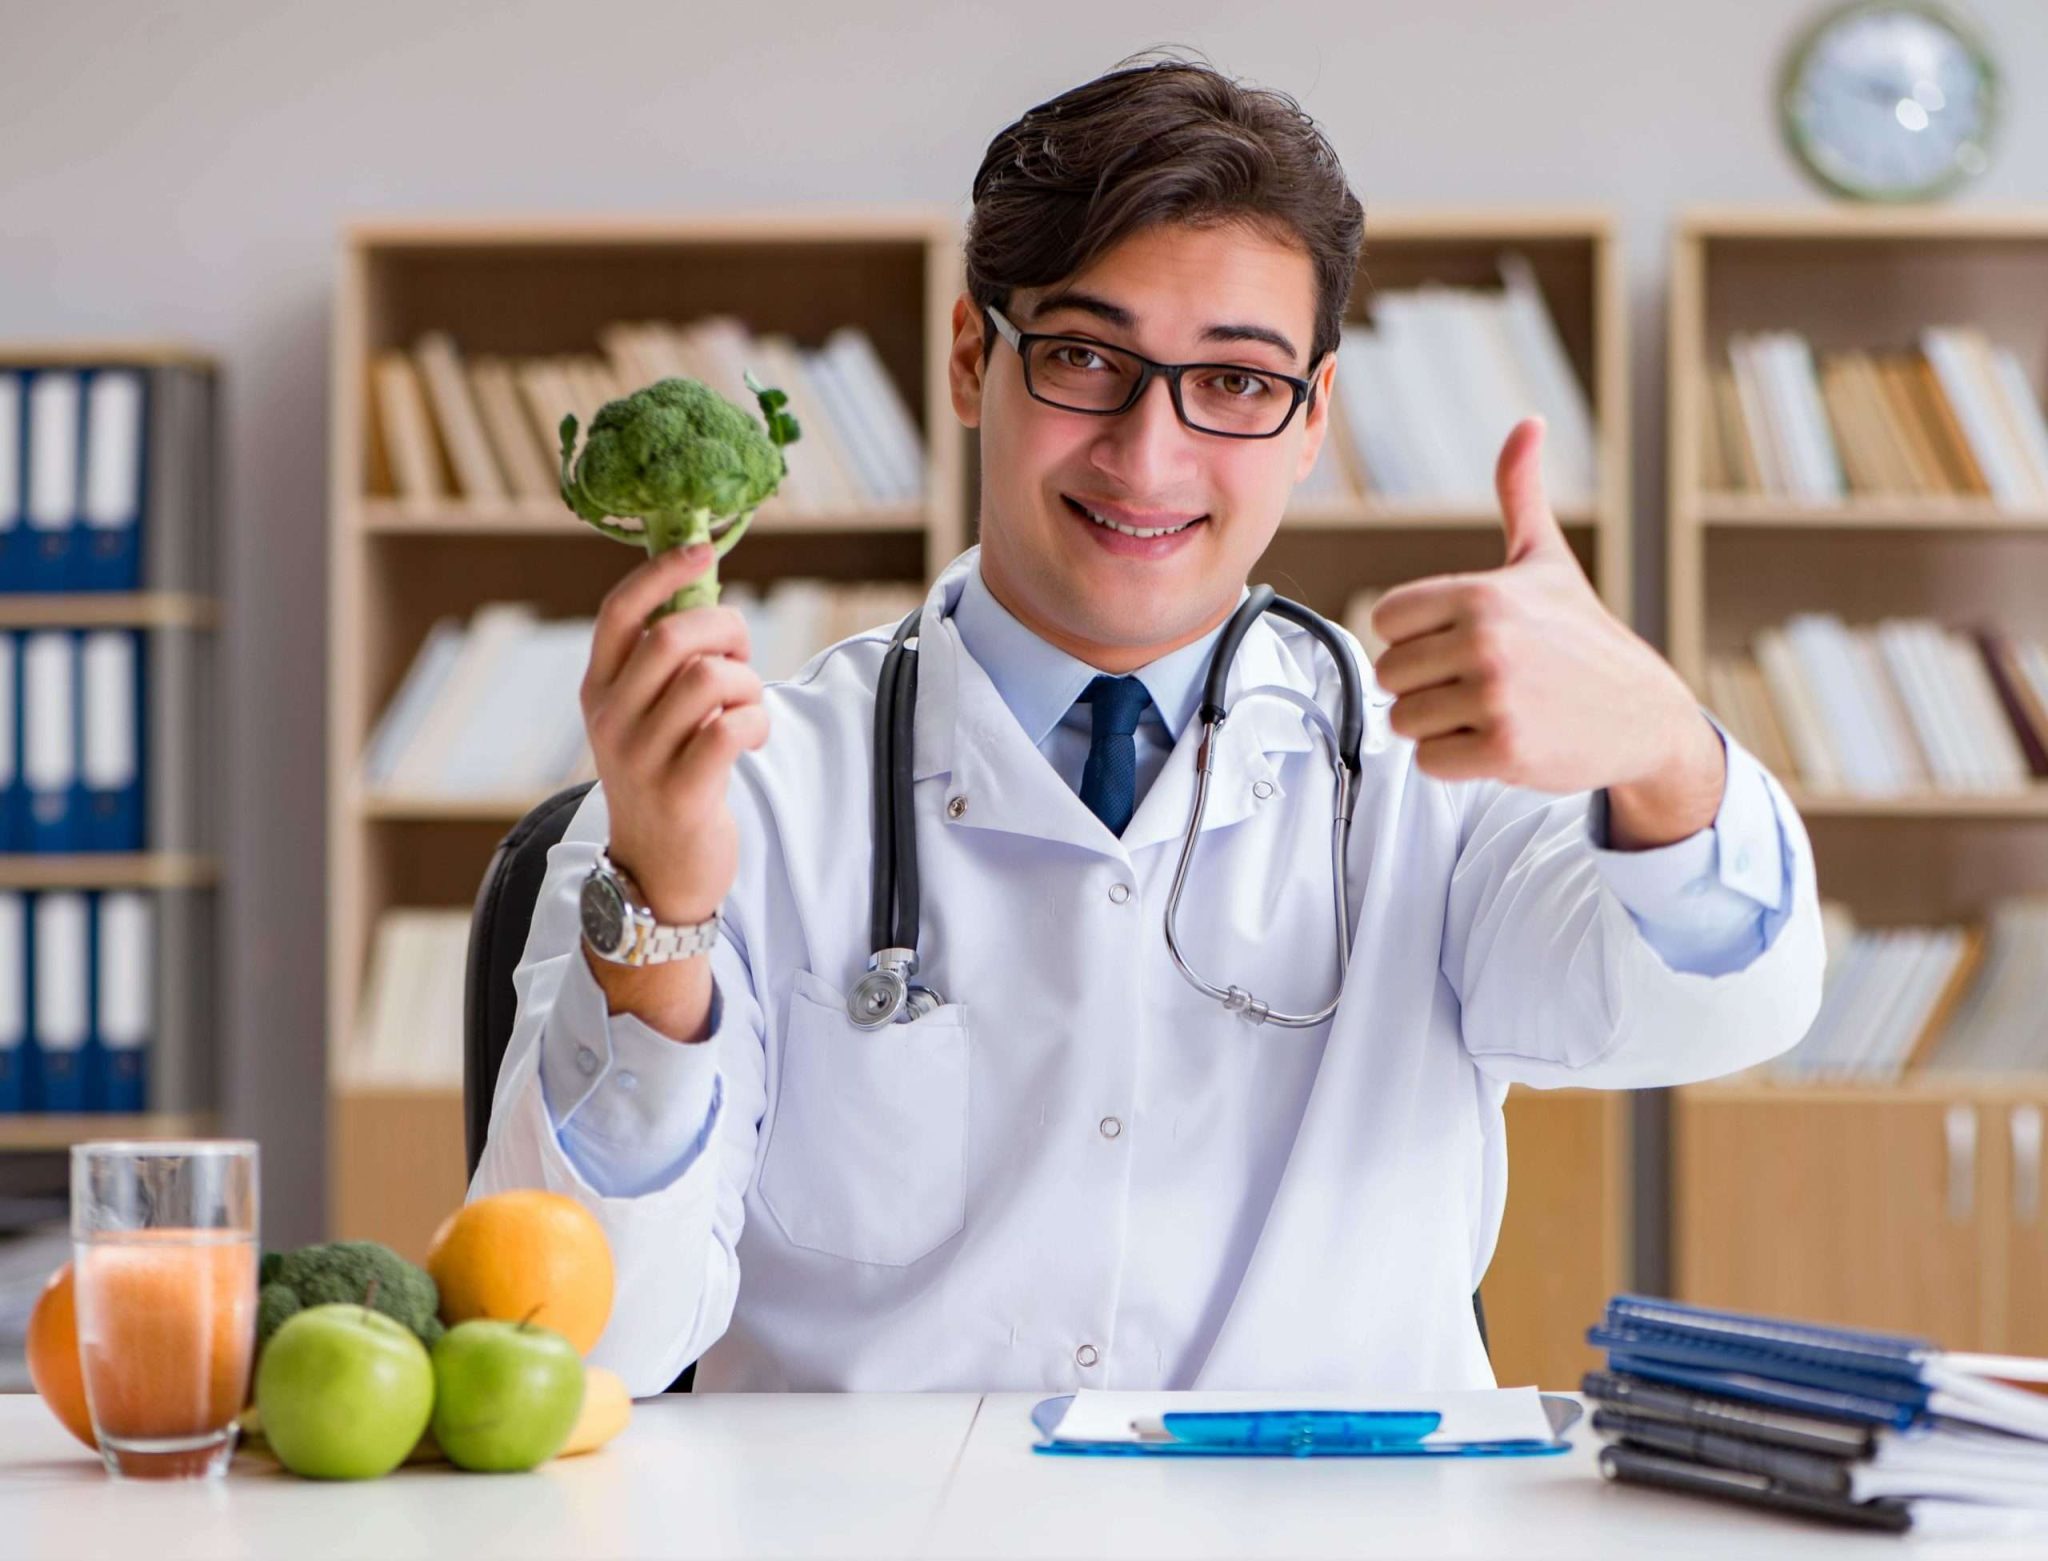 A doctor is giving thumbs up gesture with broccoli in his hands.